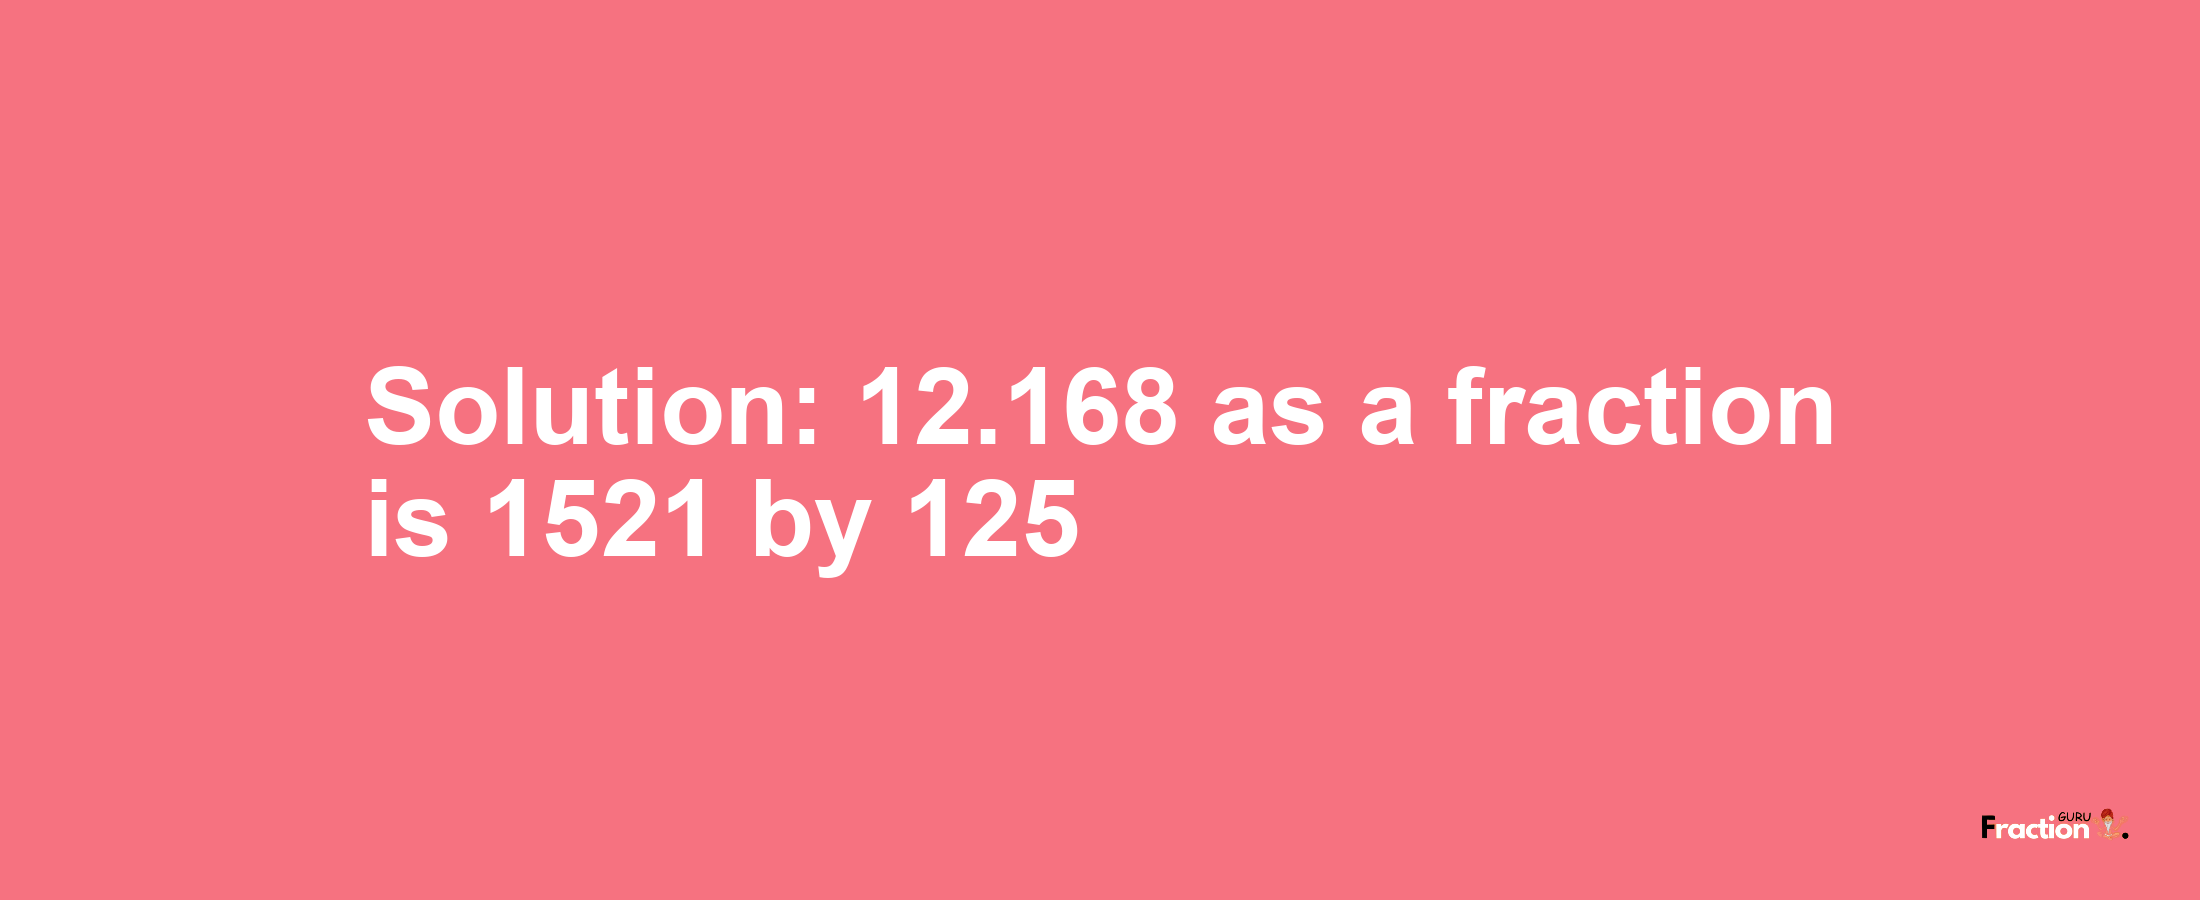 Solution:12.168 as a fraction is 1521/125